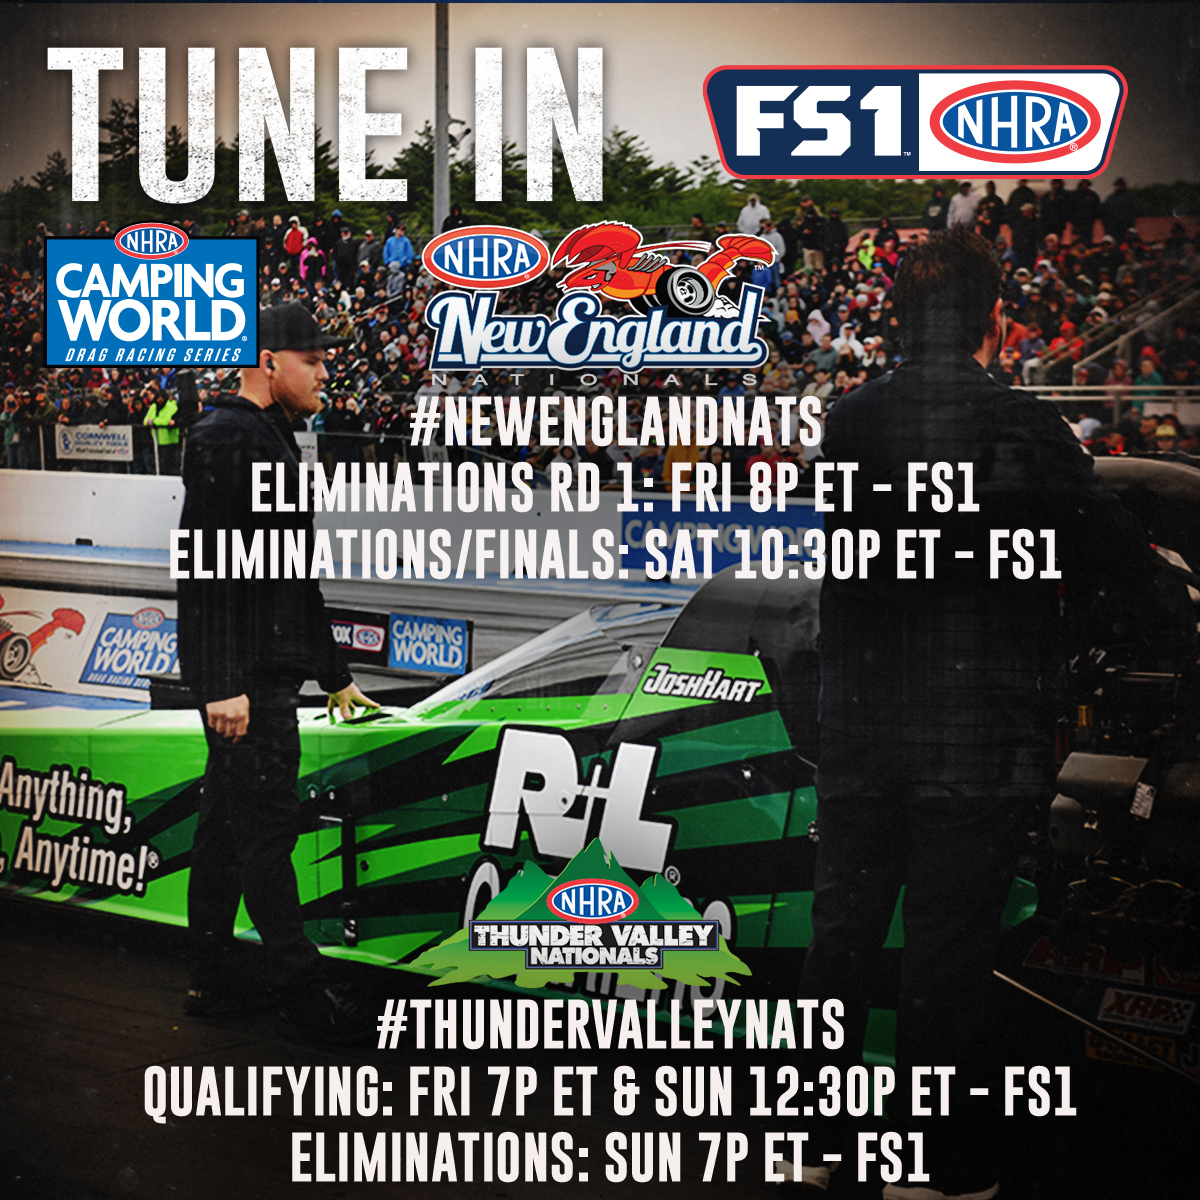 My team has a major opportunity to win two events in one weekend, and it sure is going to be exciting. Don't miss it, TUNE IN!

@RLCarriers / @TECHNETpros / @burnyzz / #ThunderValleyNats / #NHRAonFOX